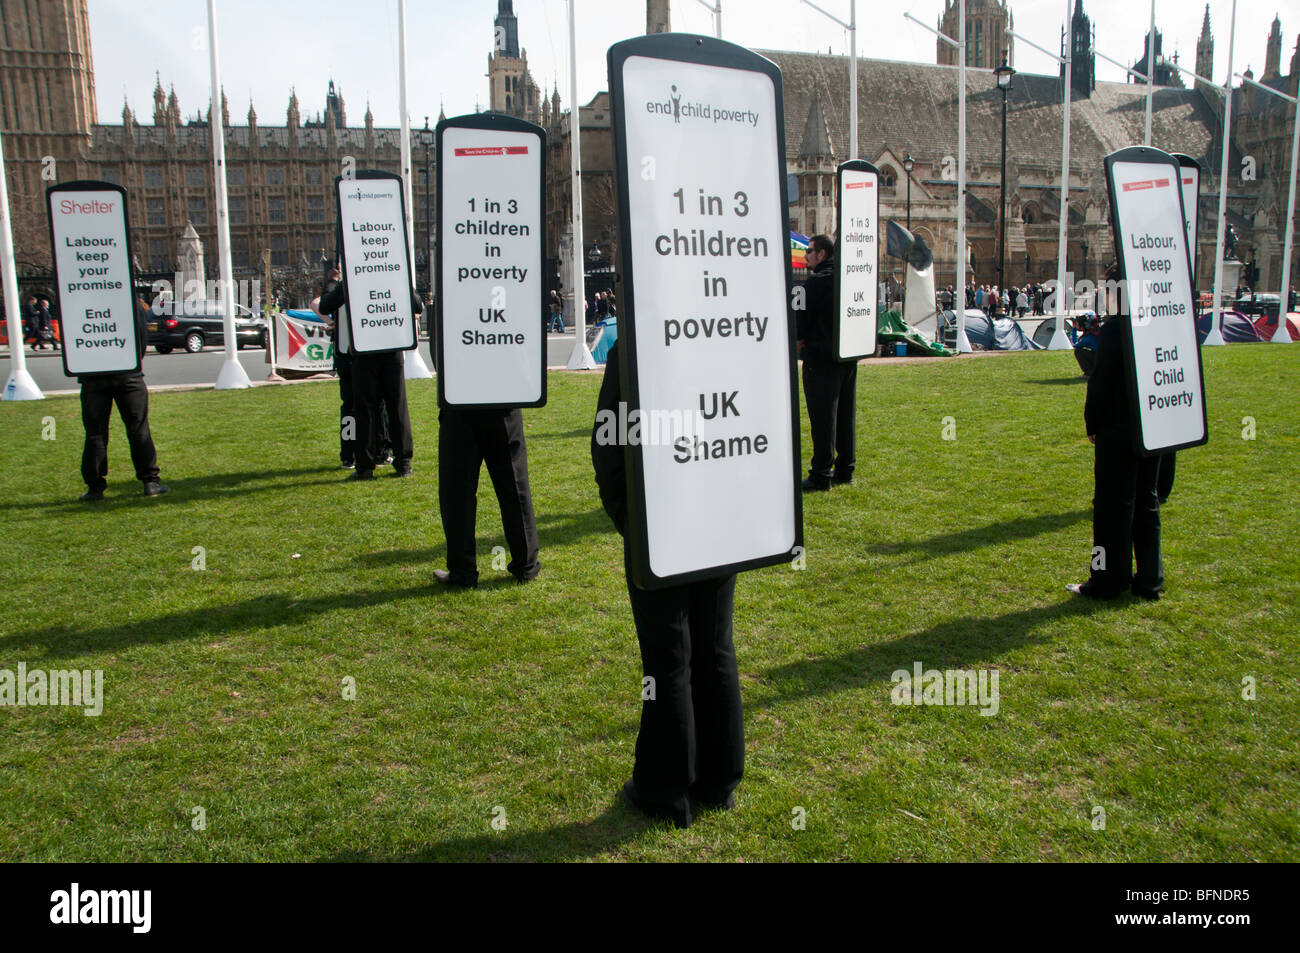 Campaign to End Child Poverty demonstrate in Parliament Sq to remind the government of their pledge to end child poverty by 2020 Stock Photo